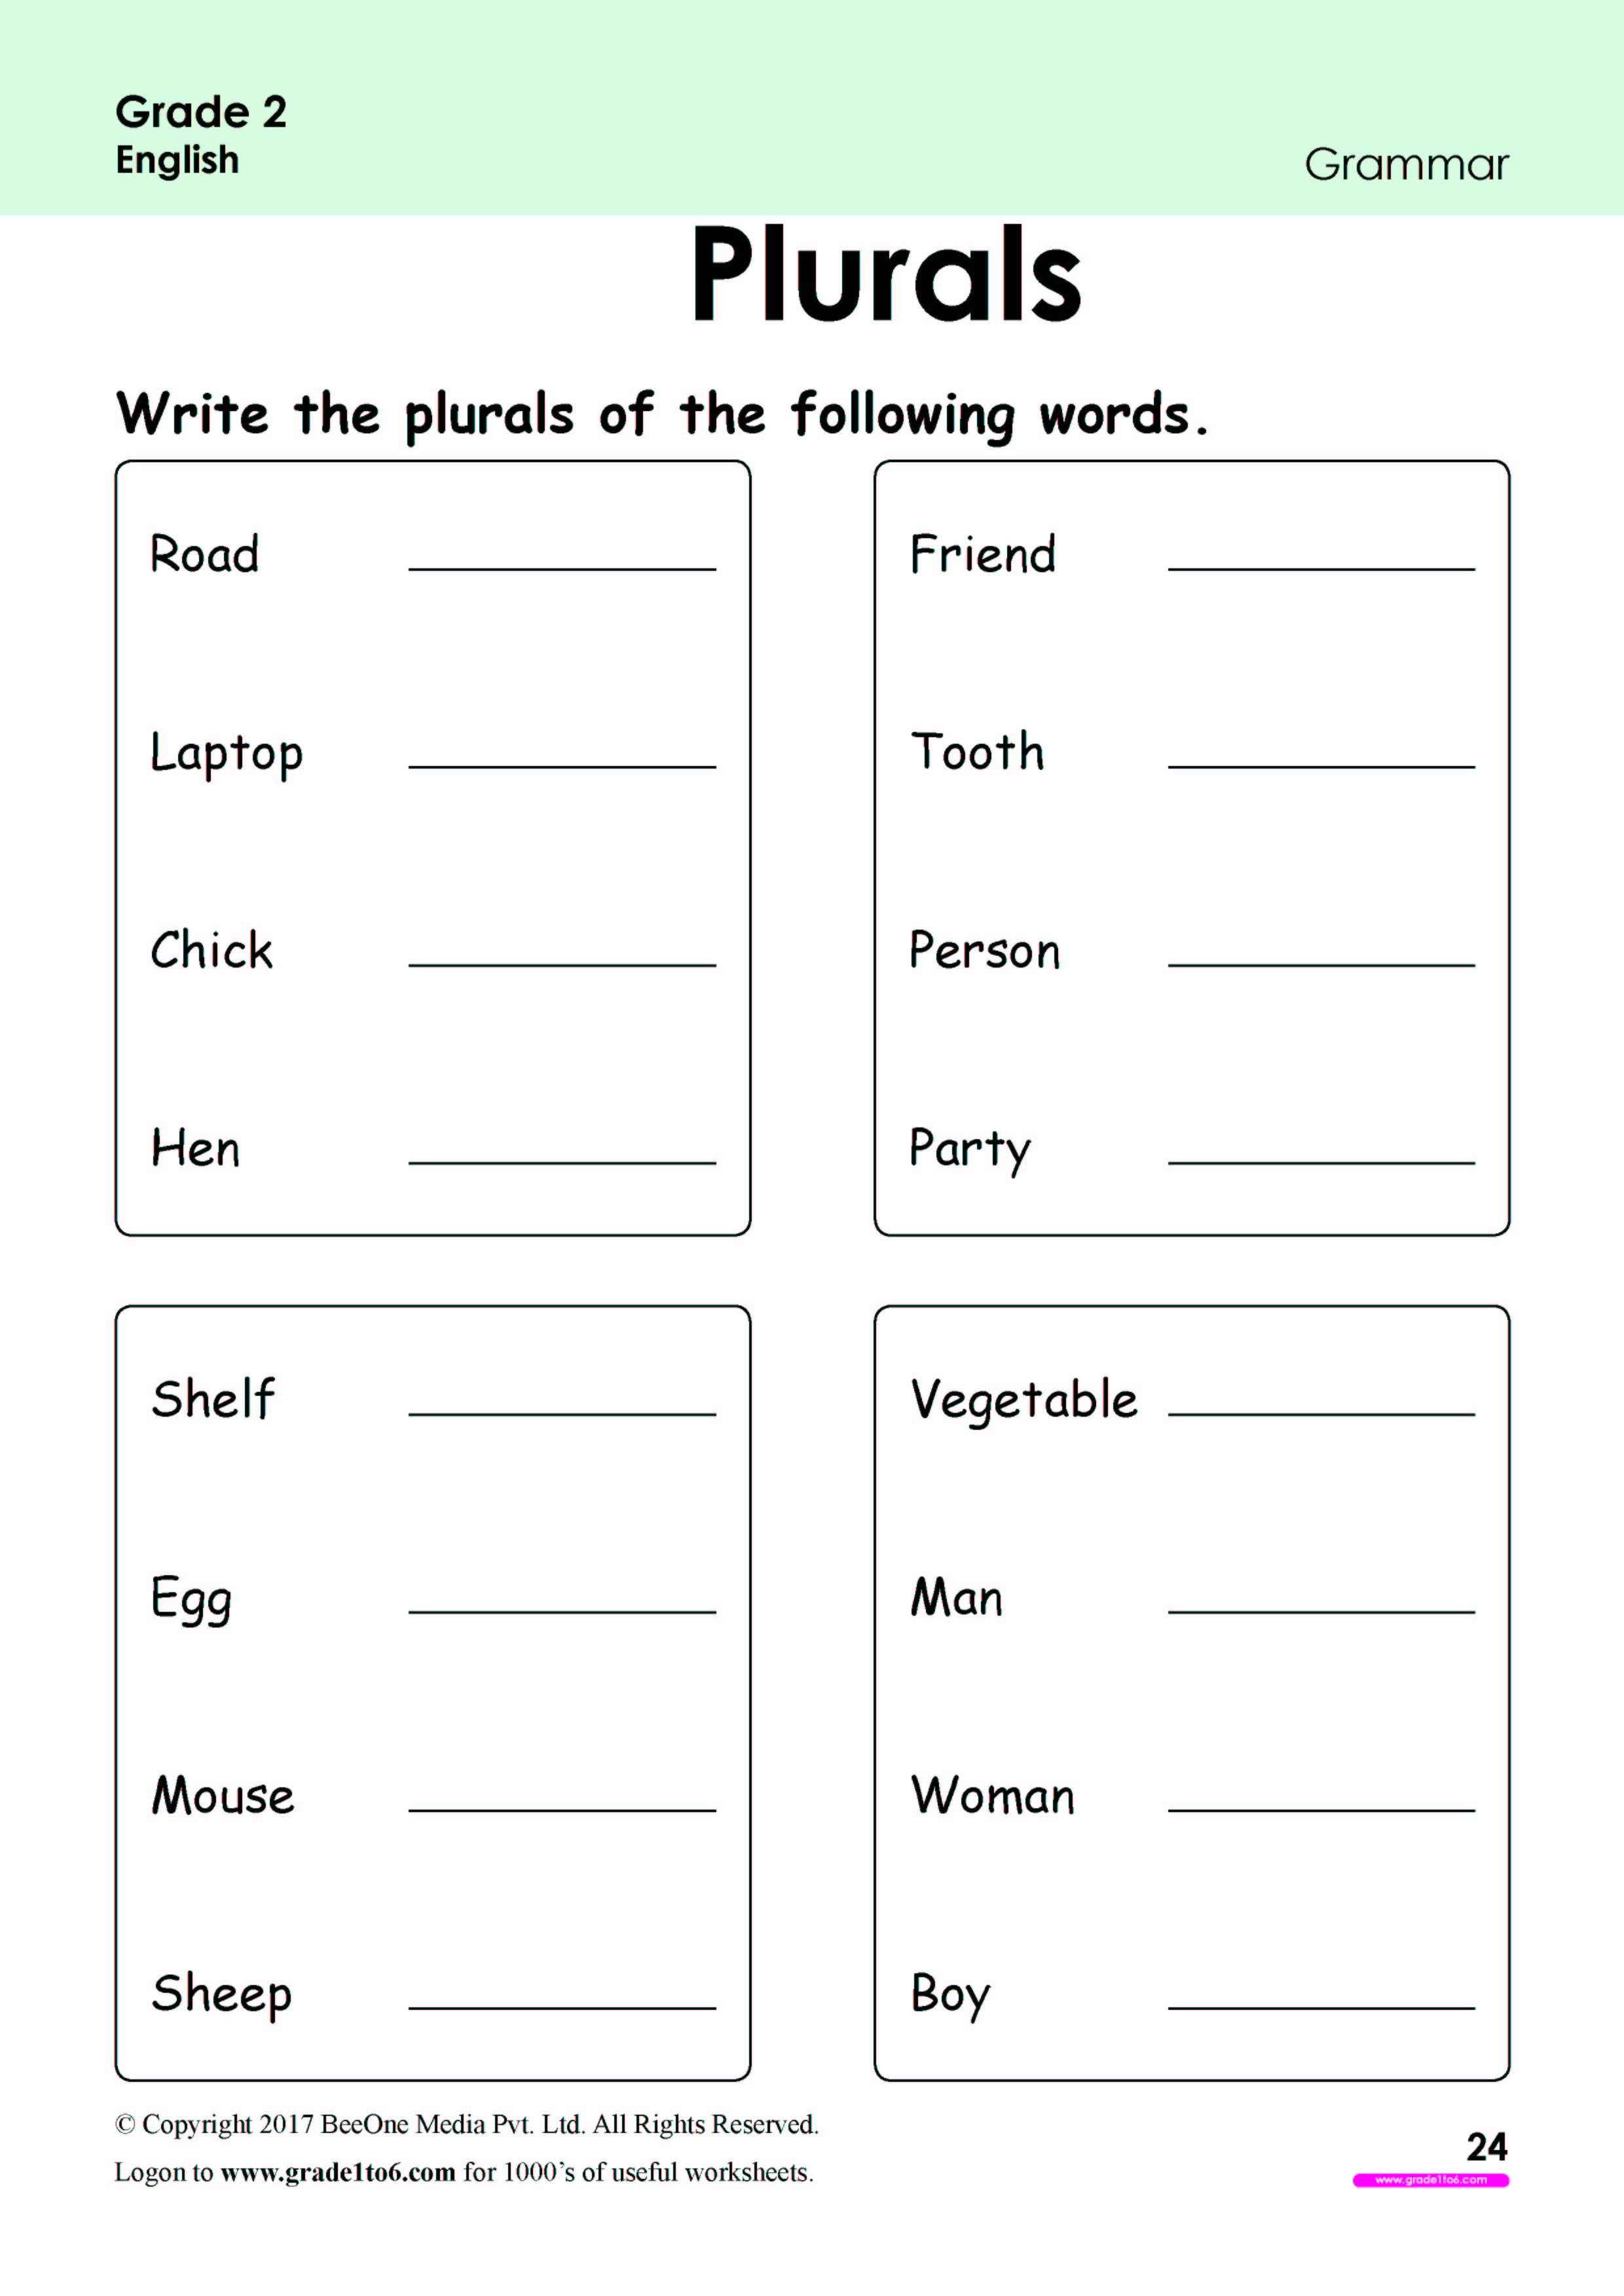 singular-and-plural-nouns-worksheets-from-the-teacher-s-guide-plural